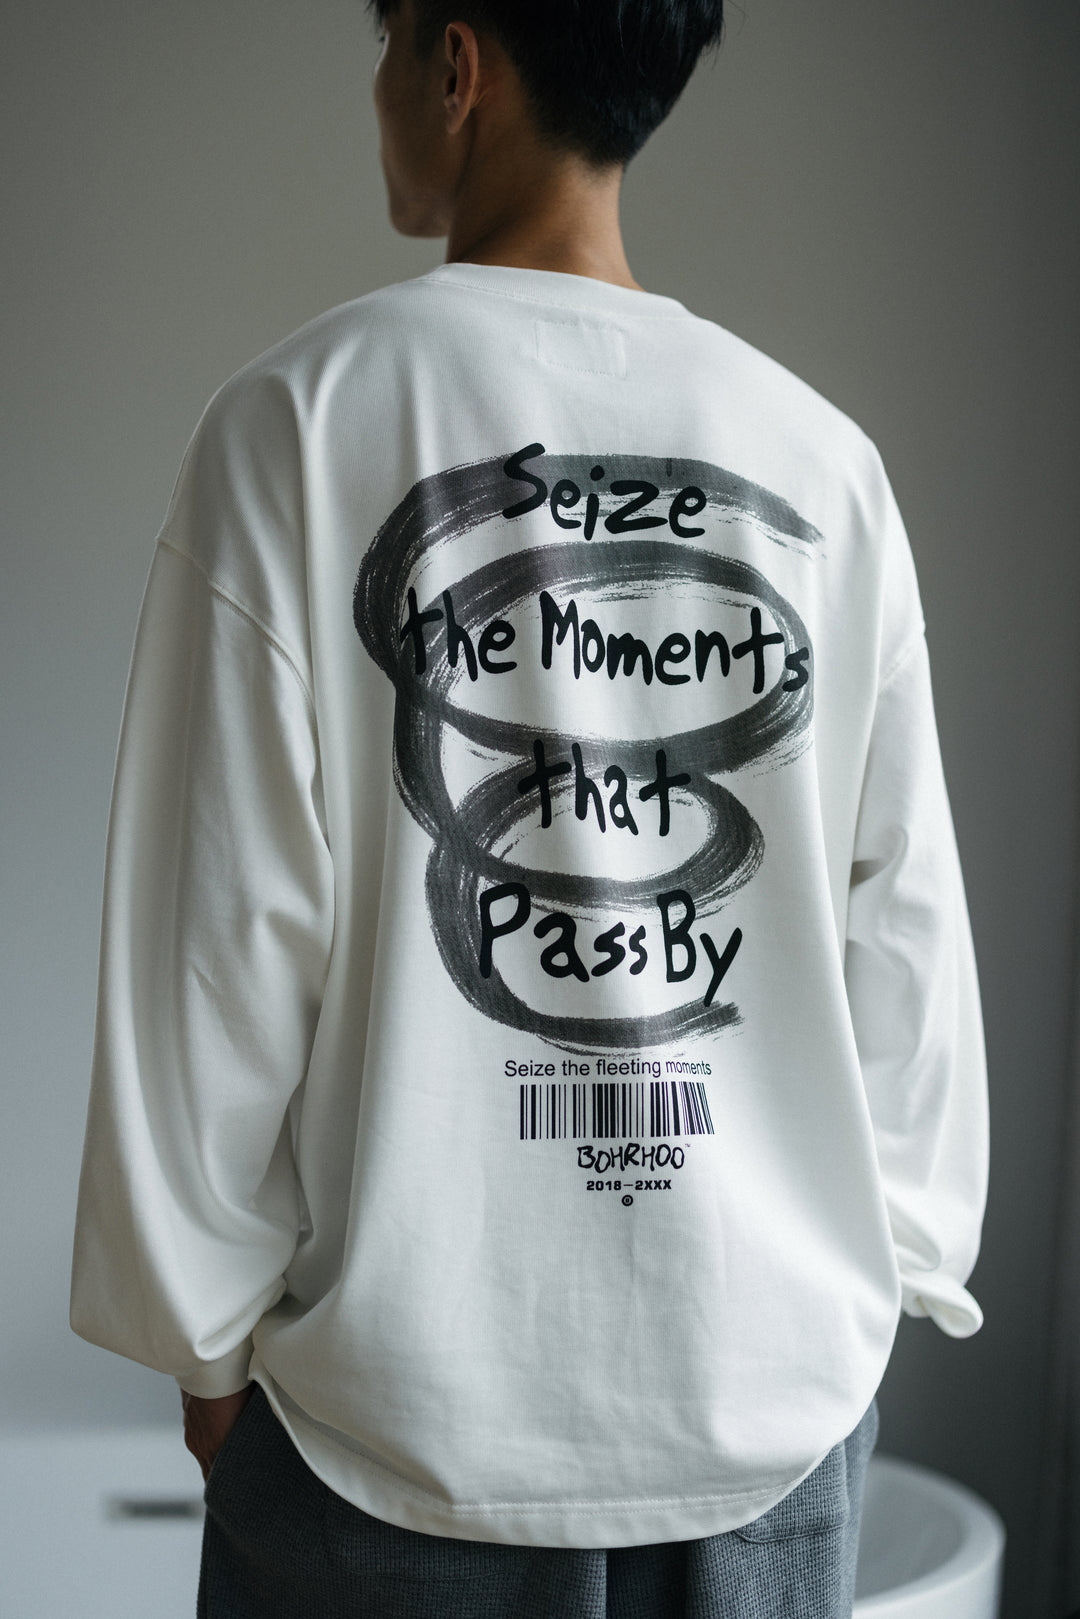 "Seize the moment" Print Tee